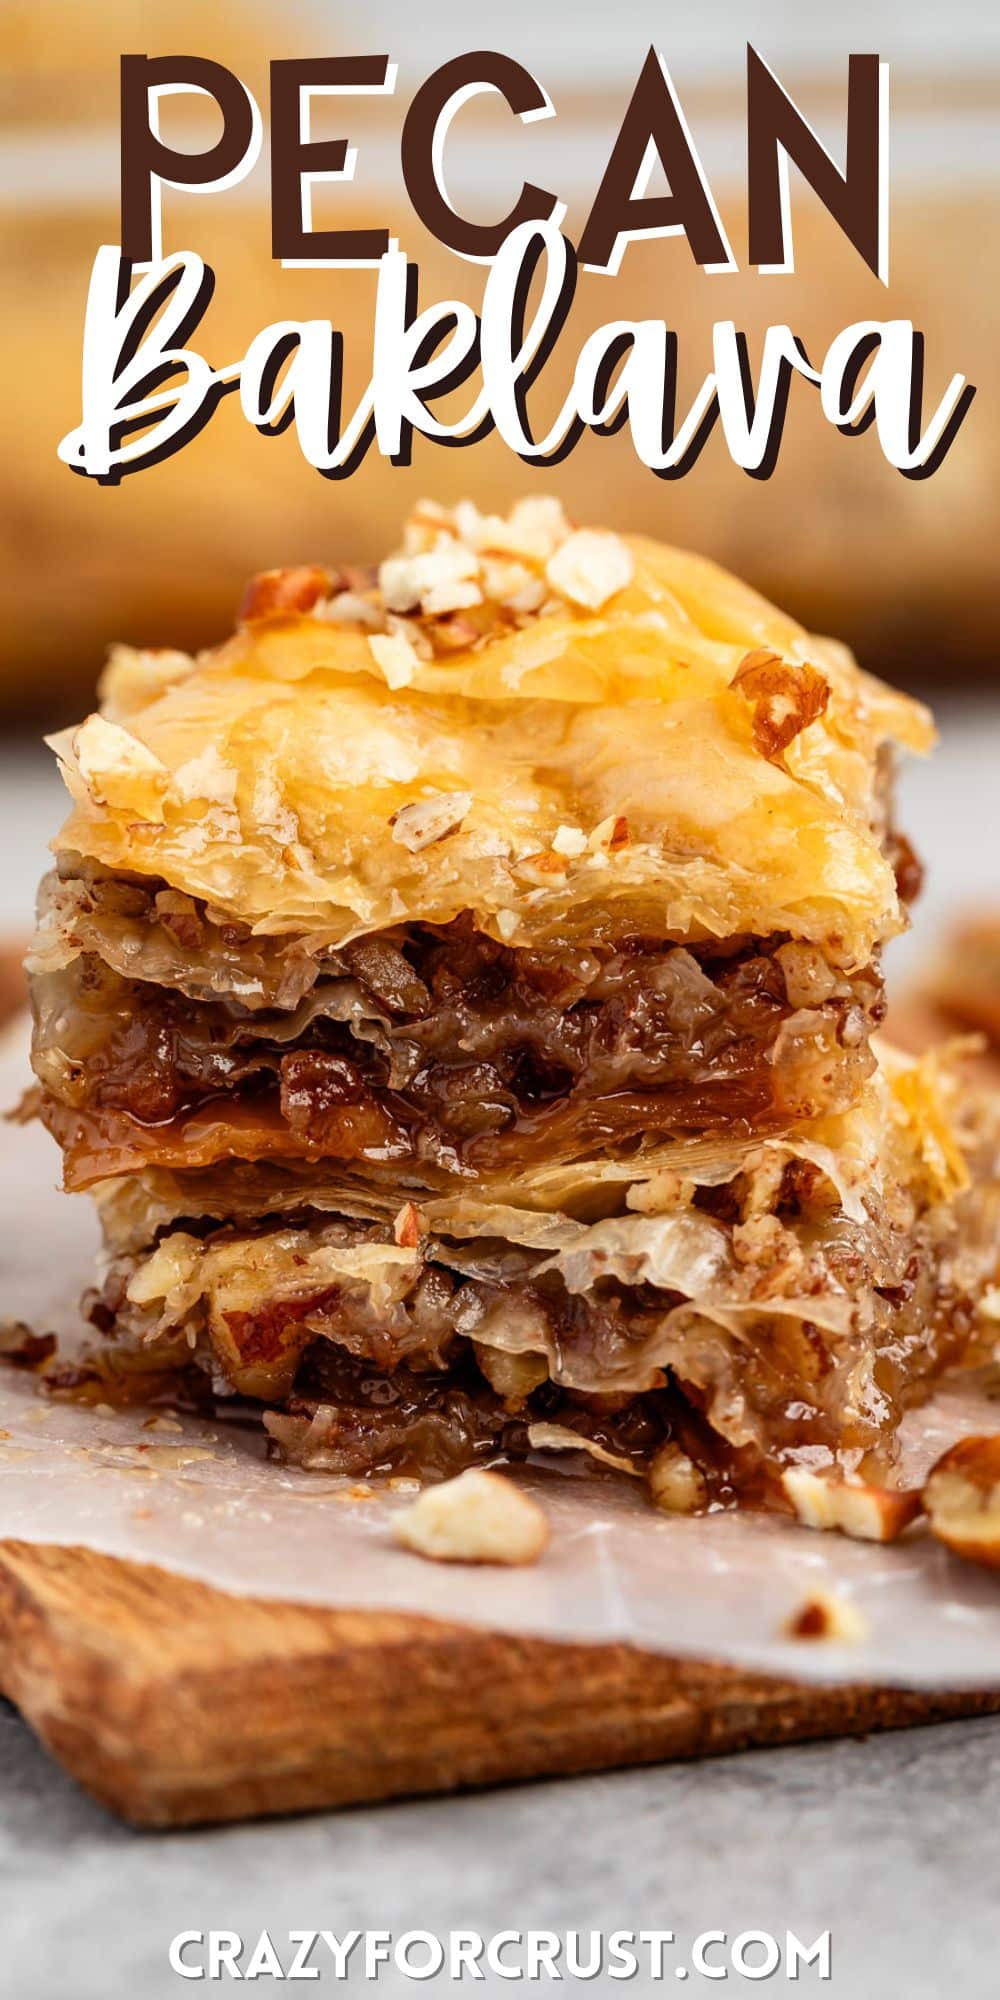 stacked baklava with pecans layered in it with words on the image.